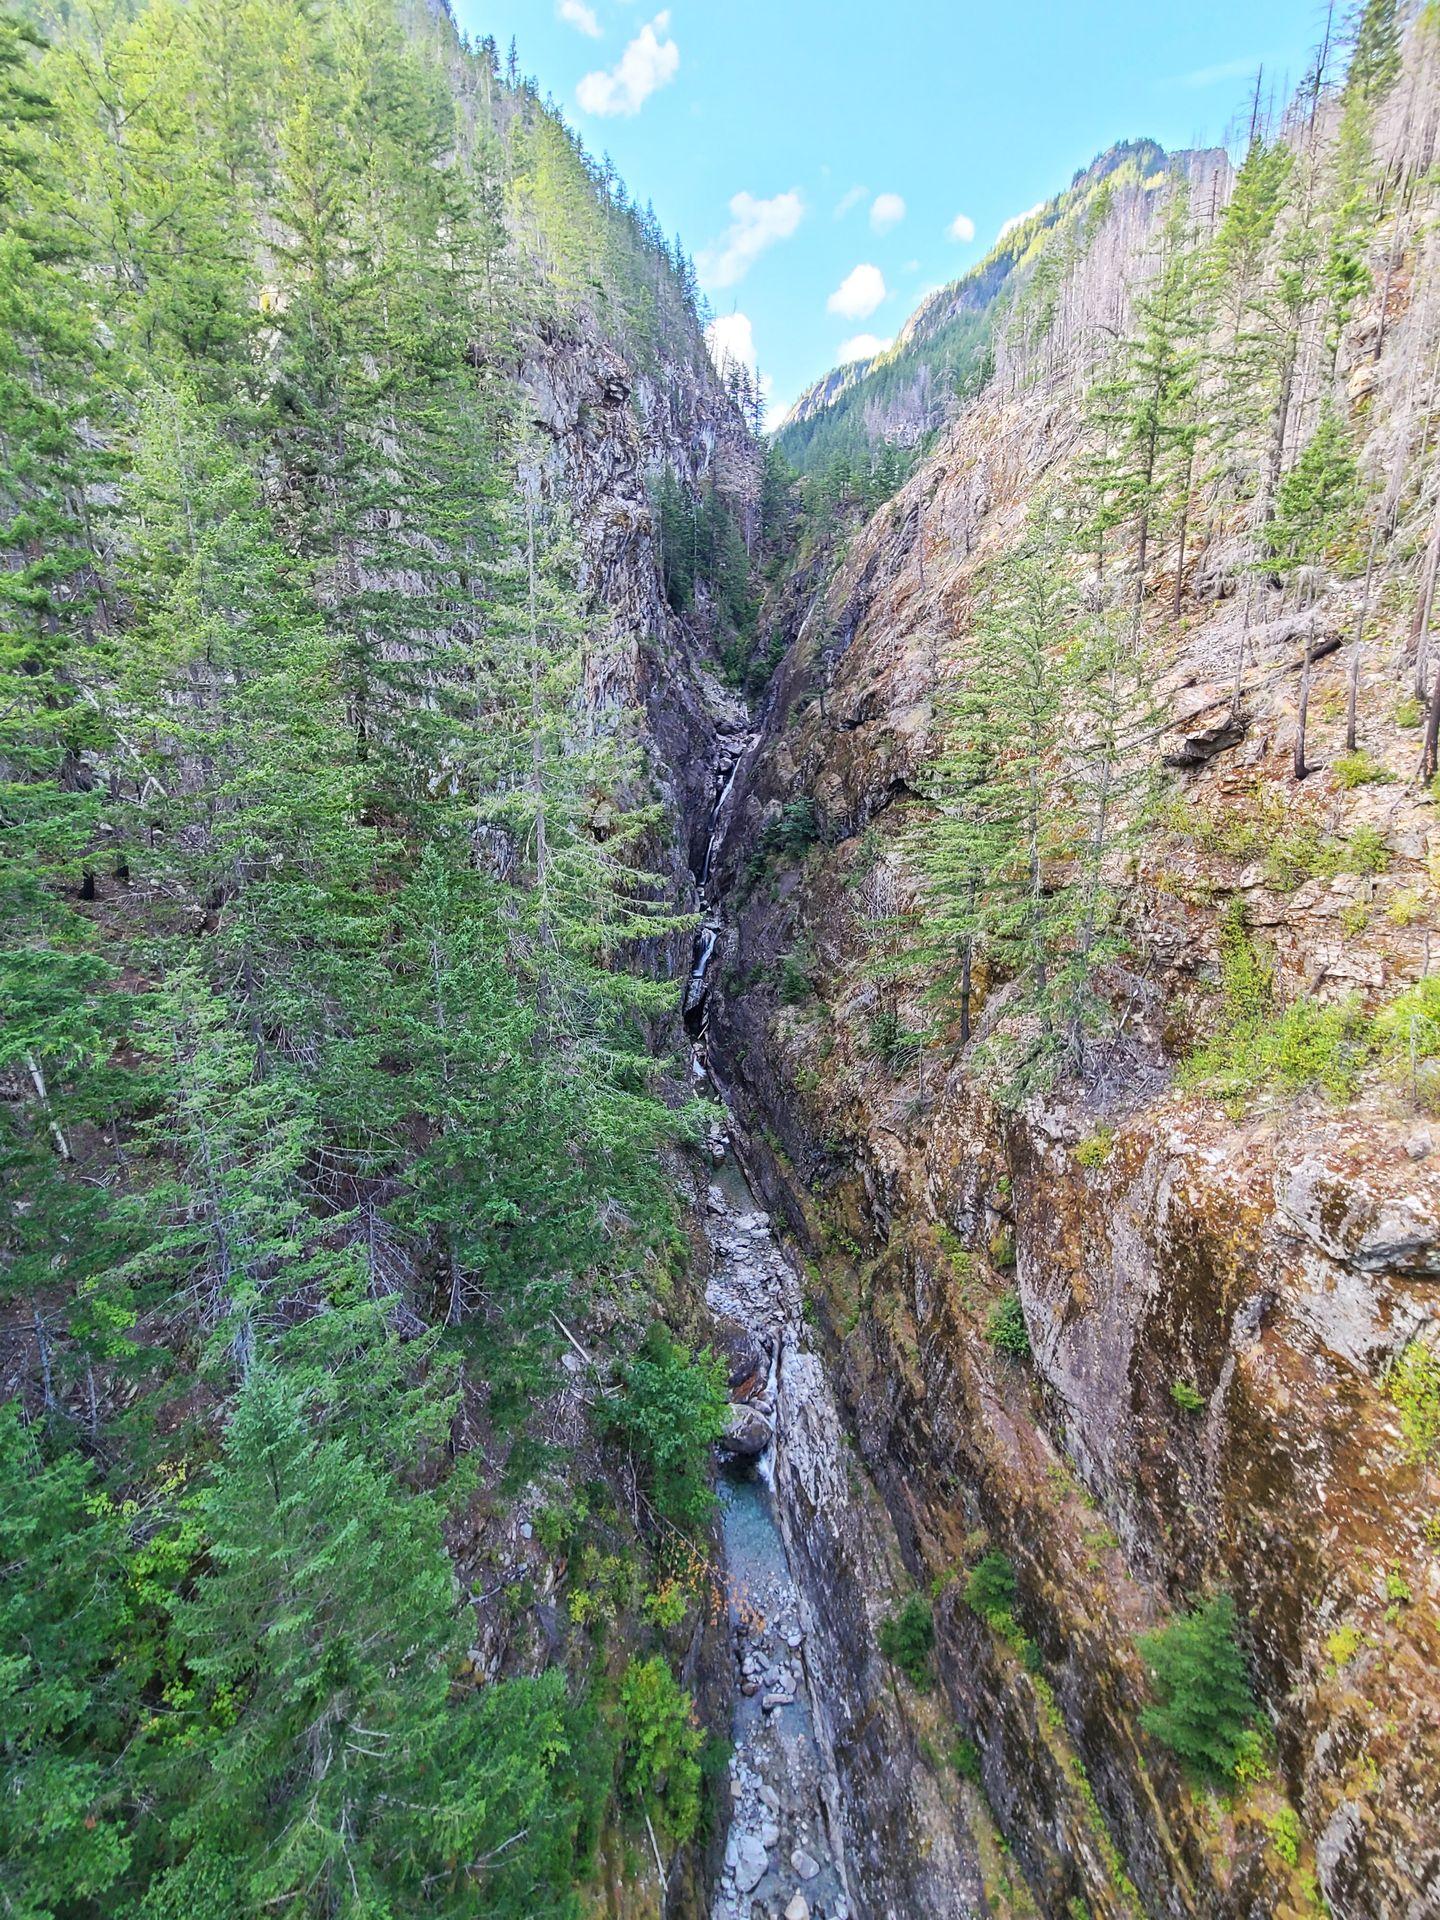 A narrow waterfall in a gorge surrounded by trees.